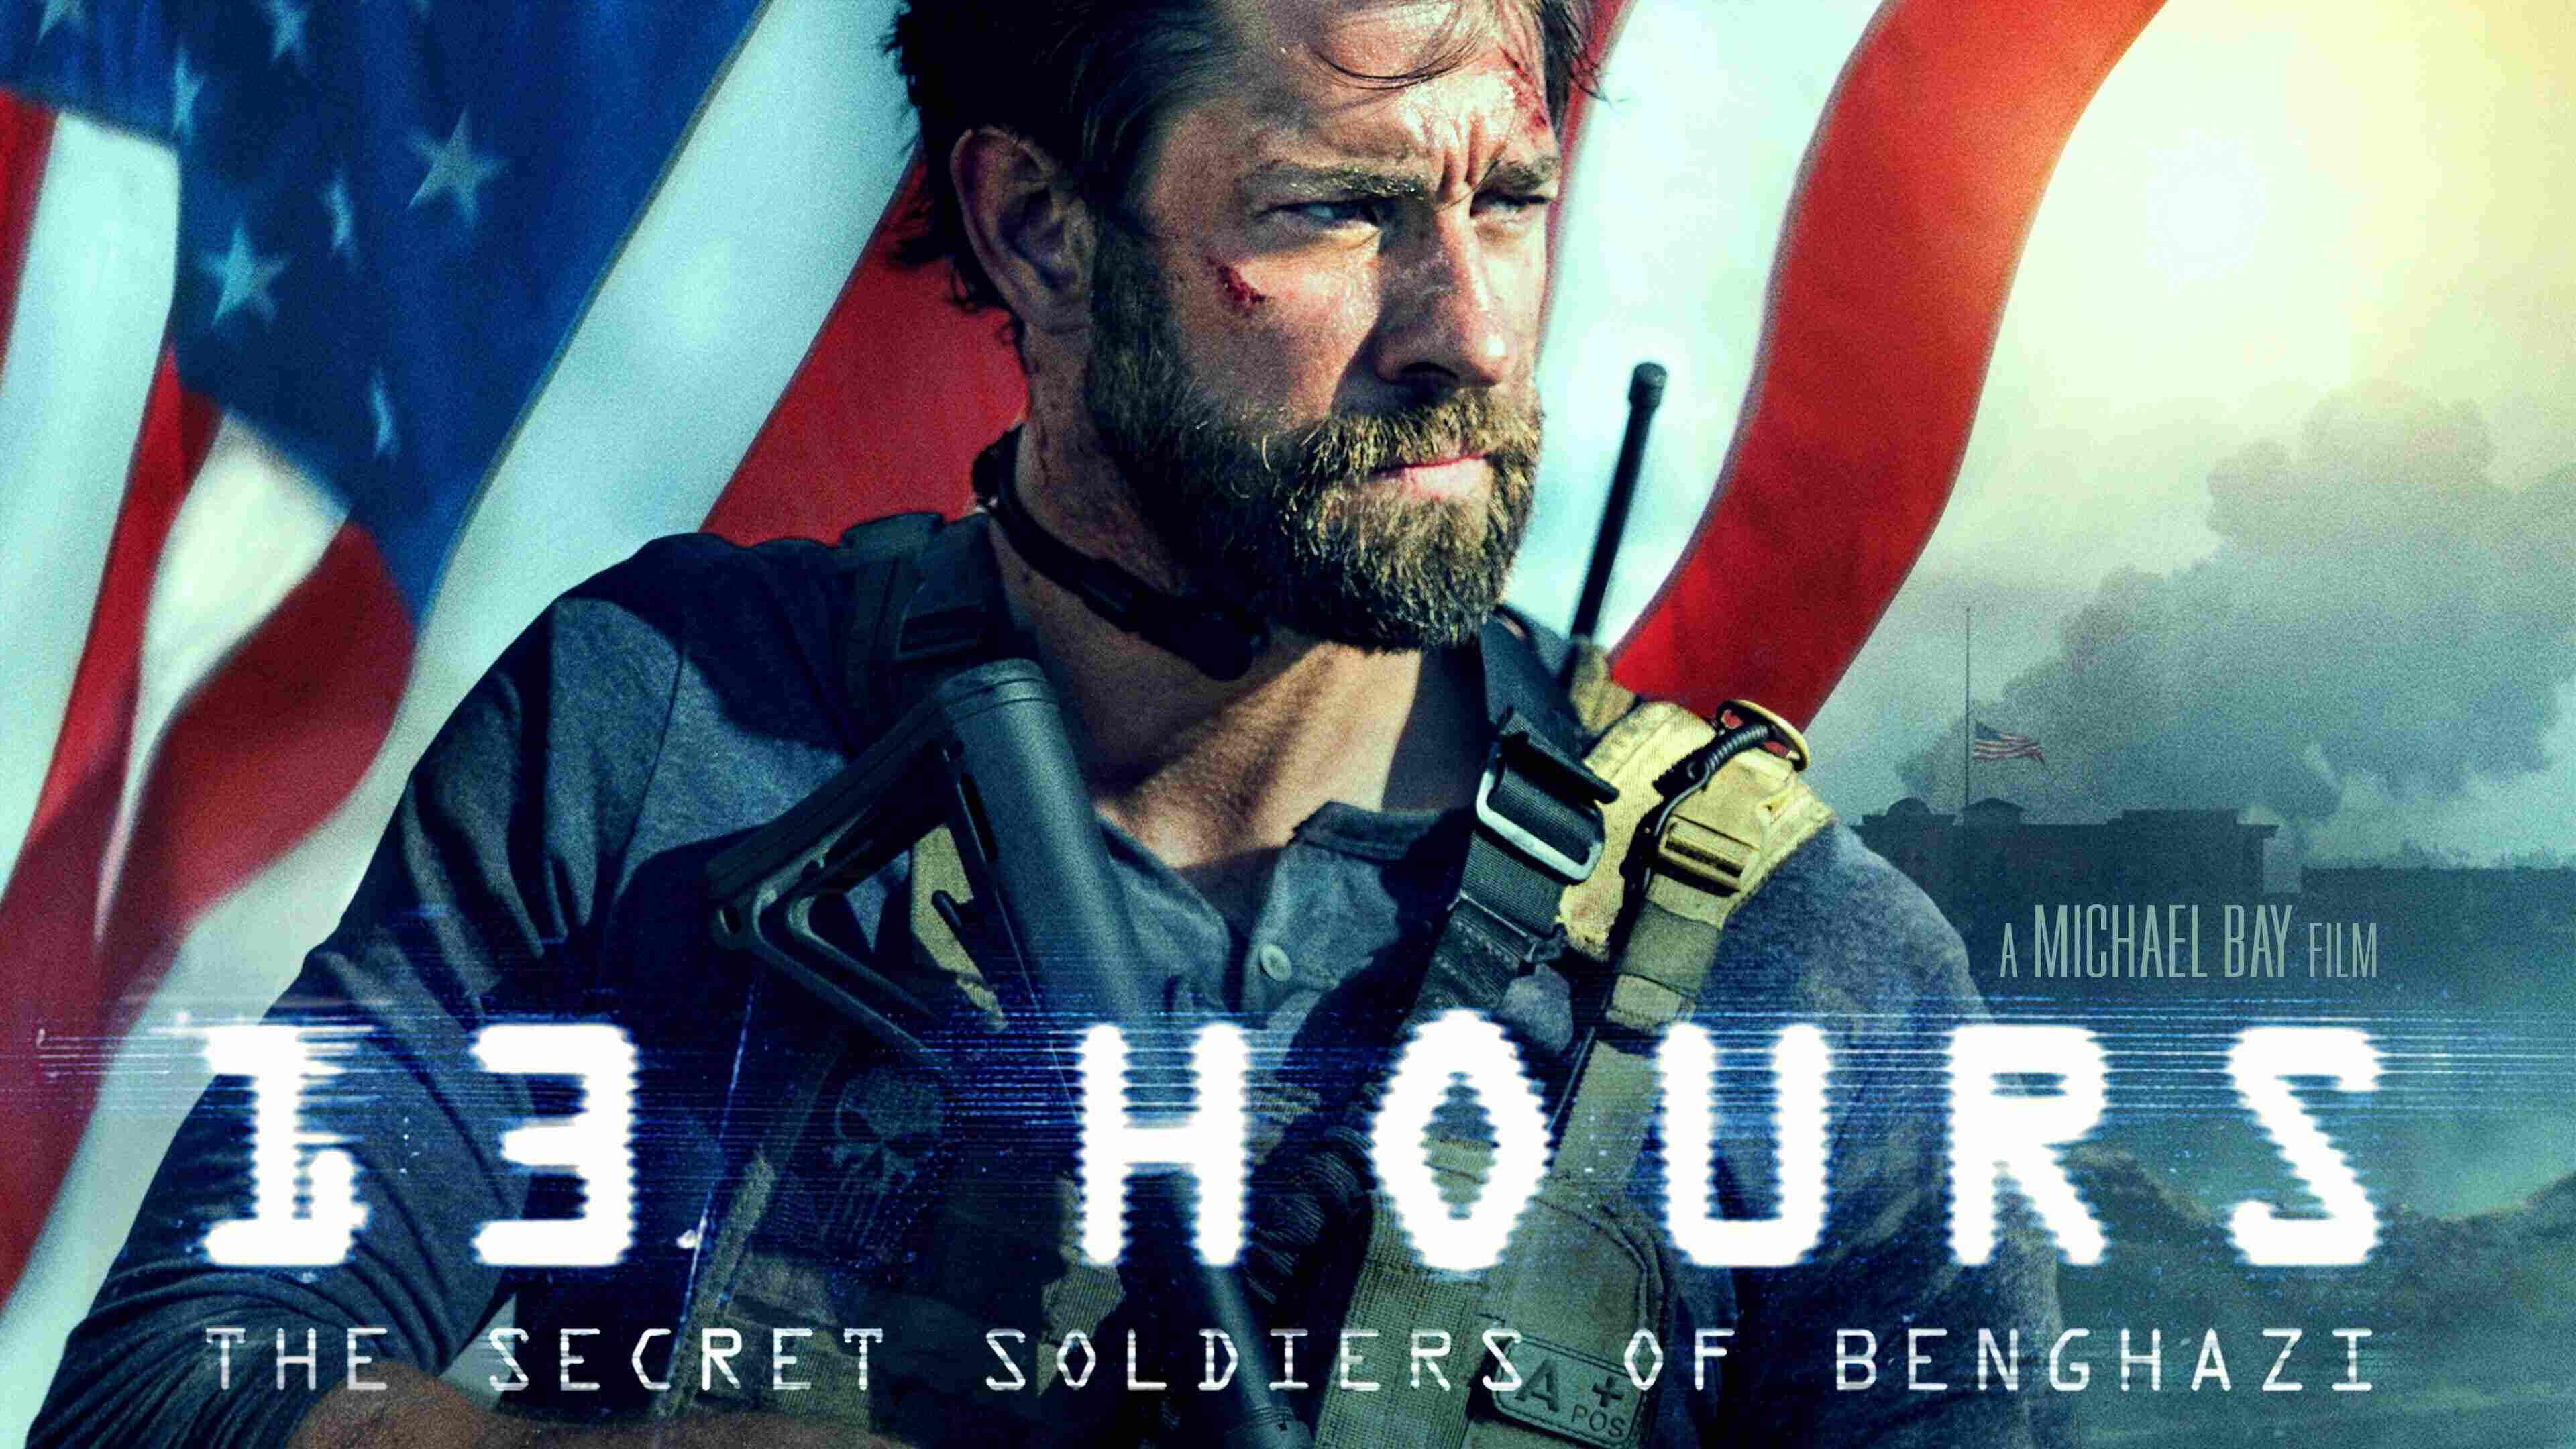 34-facts-about-the-movie-13-hours-the-secret-soldiers-of-benghazi